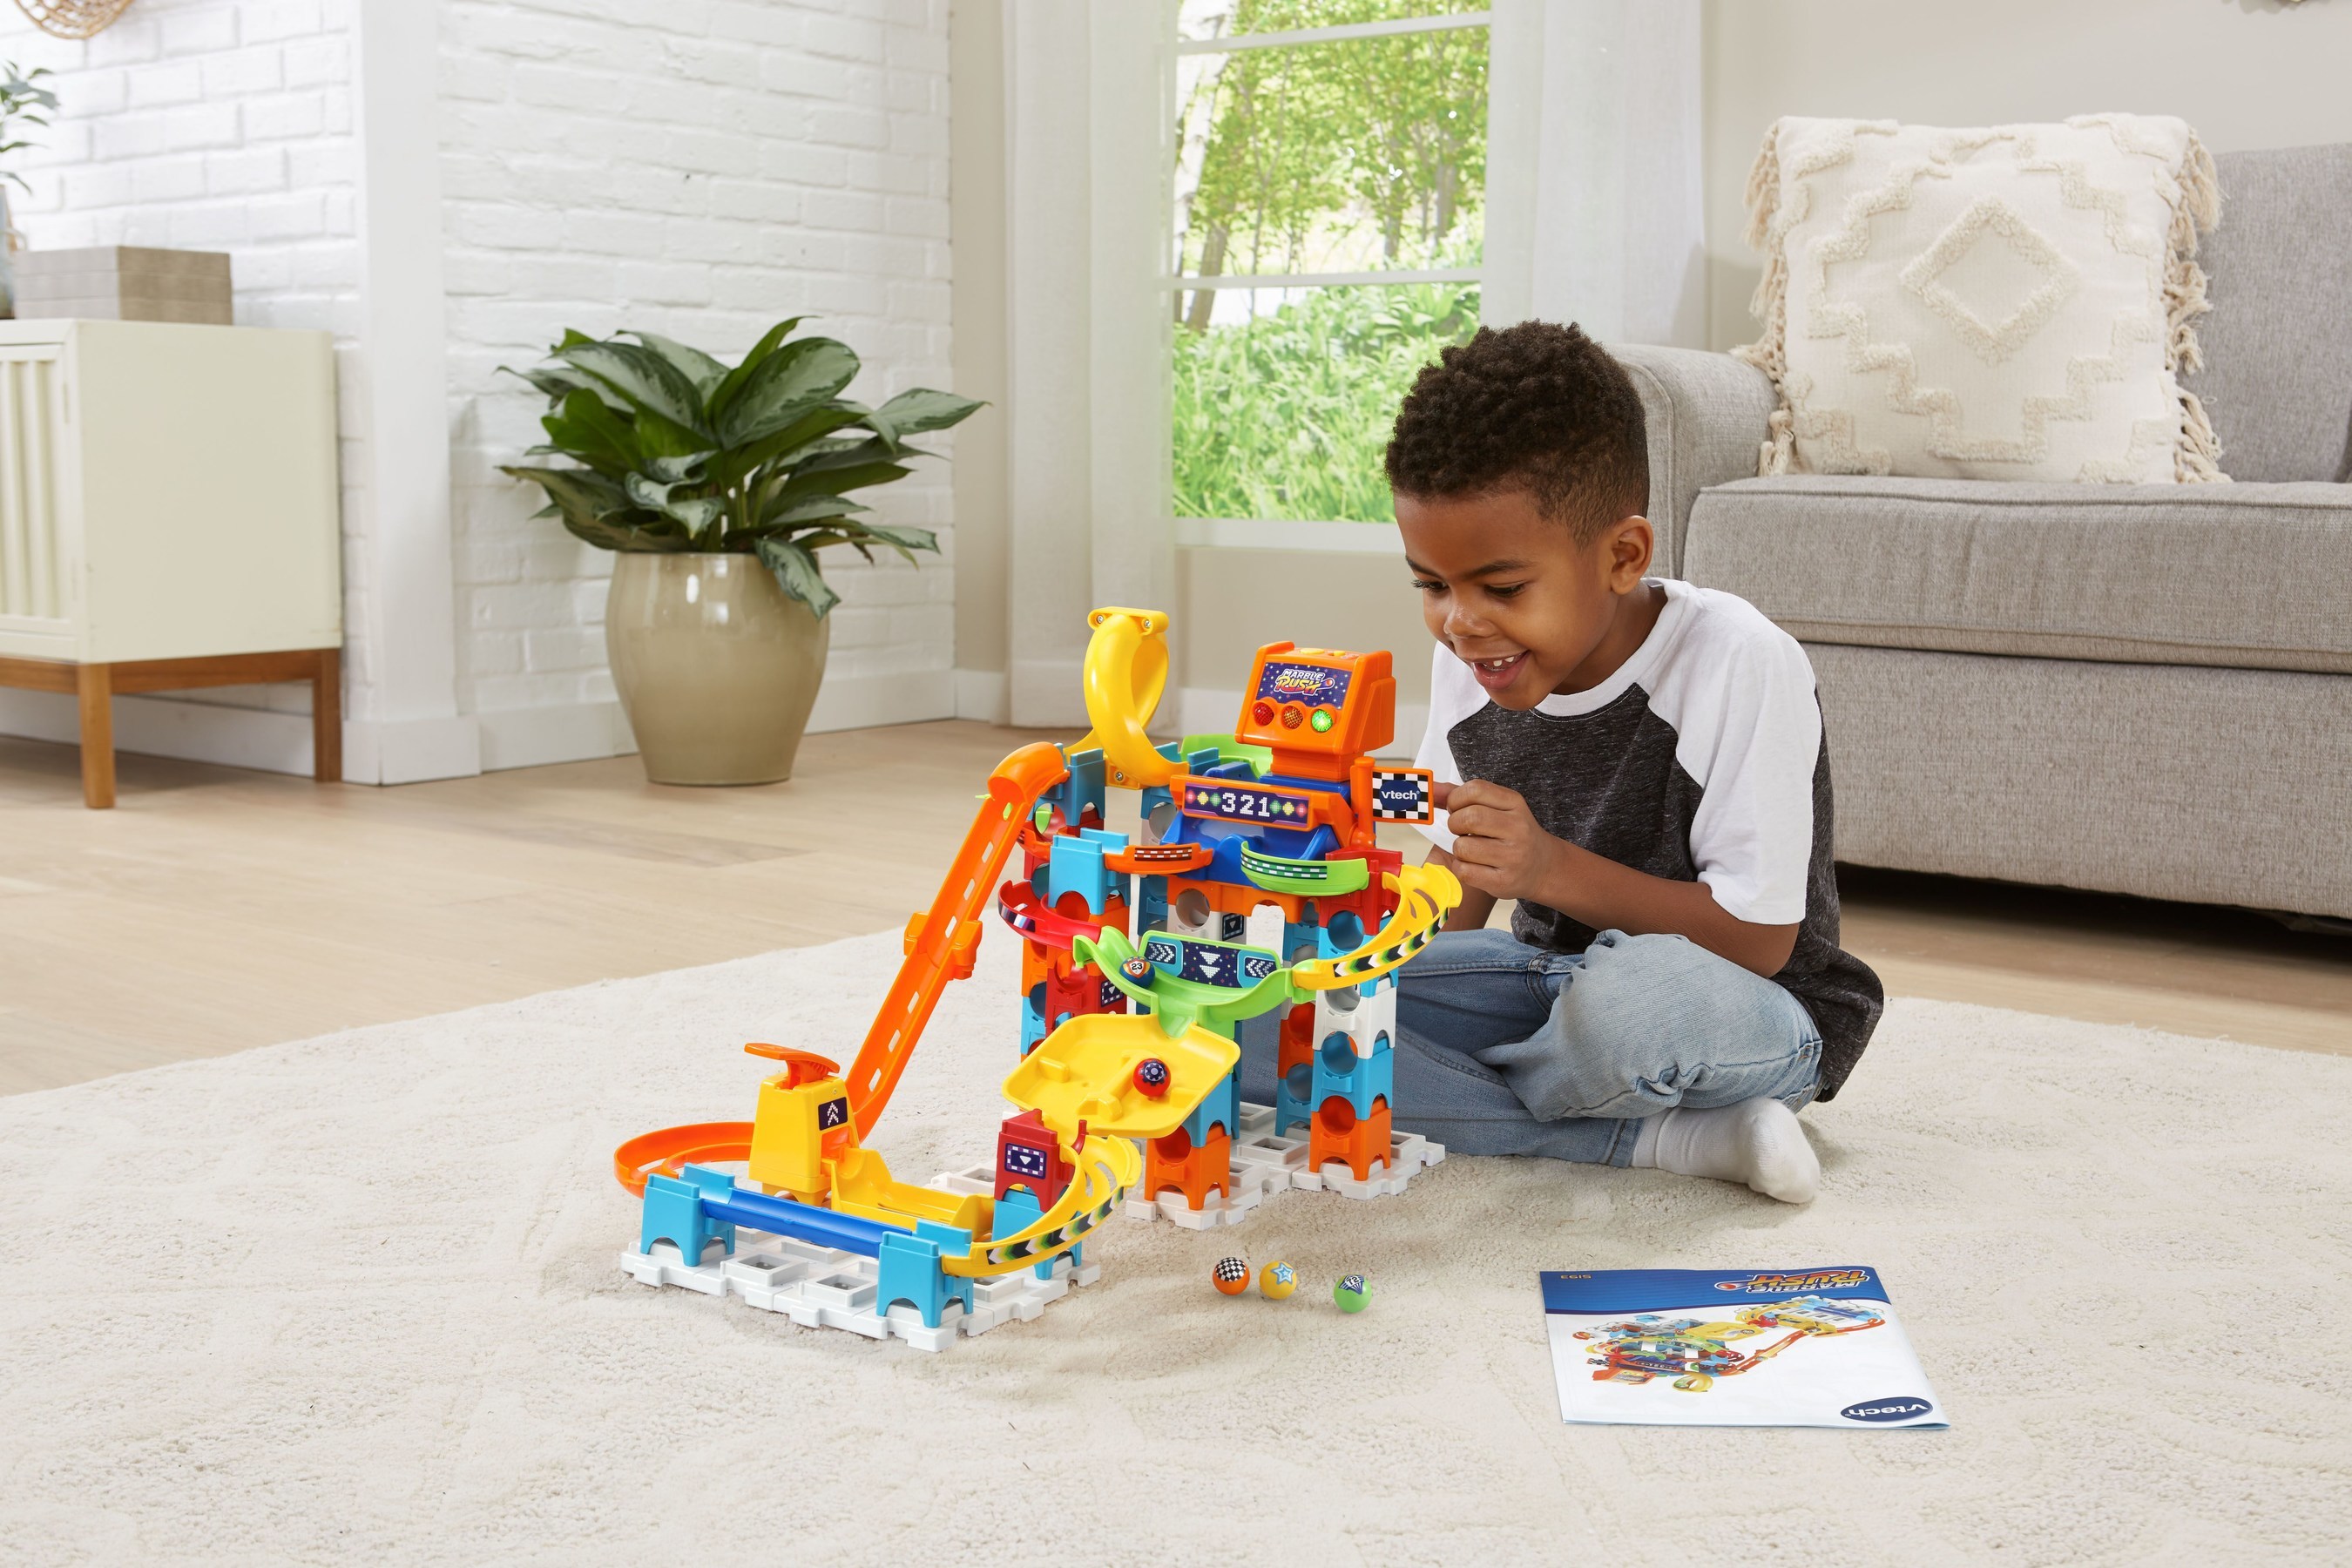 Set of marbles Vtech Marble Rush Marble Run - Racing Circuit Track wit –